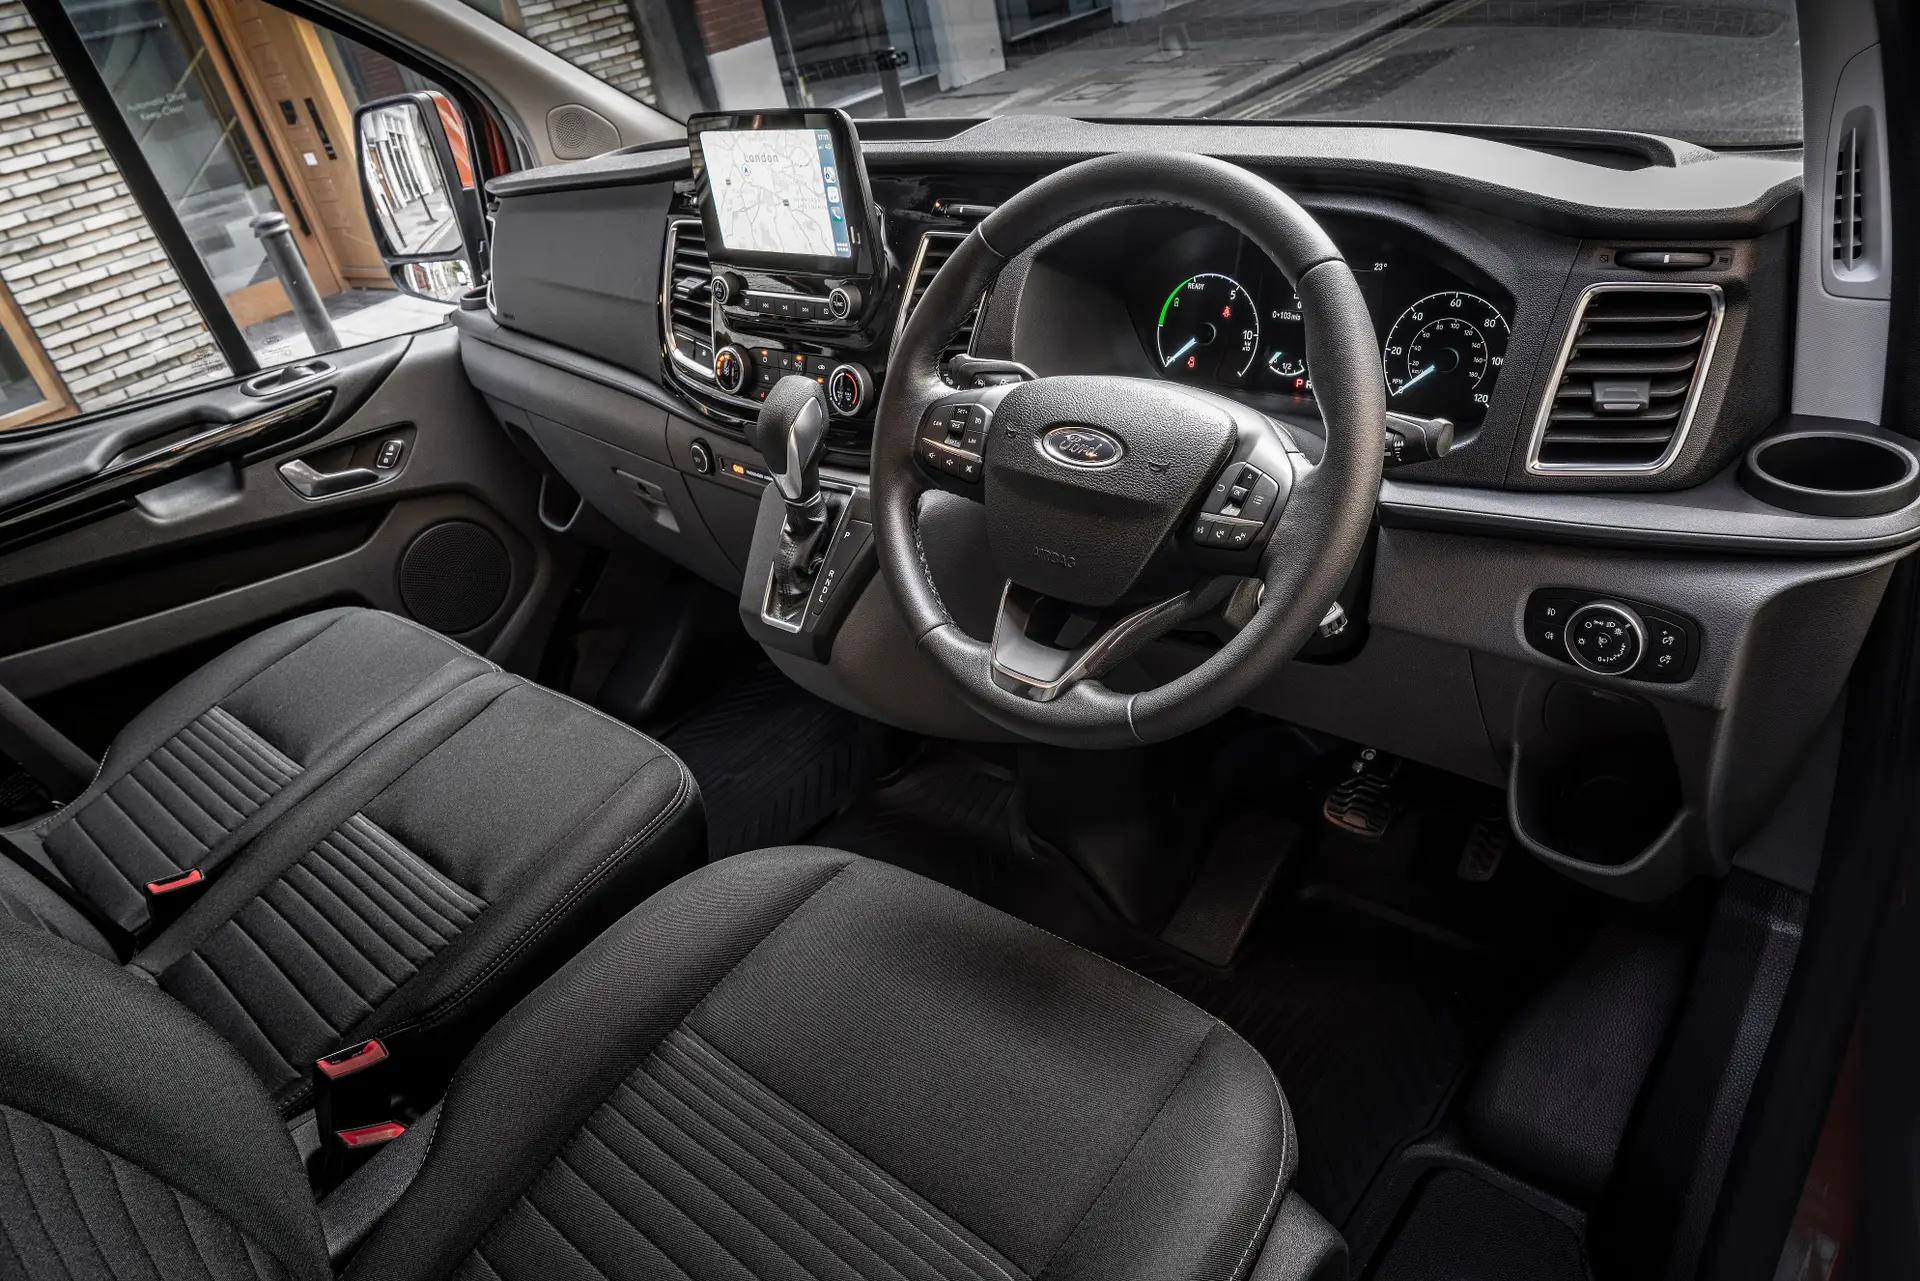 Used Ford Transit Custom (2012-2022) Review: interior